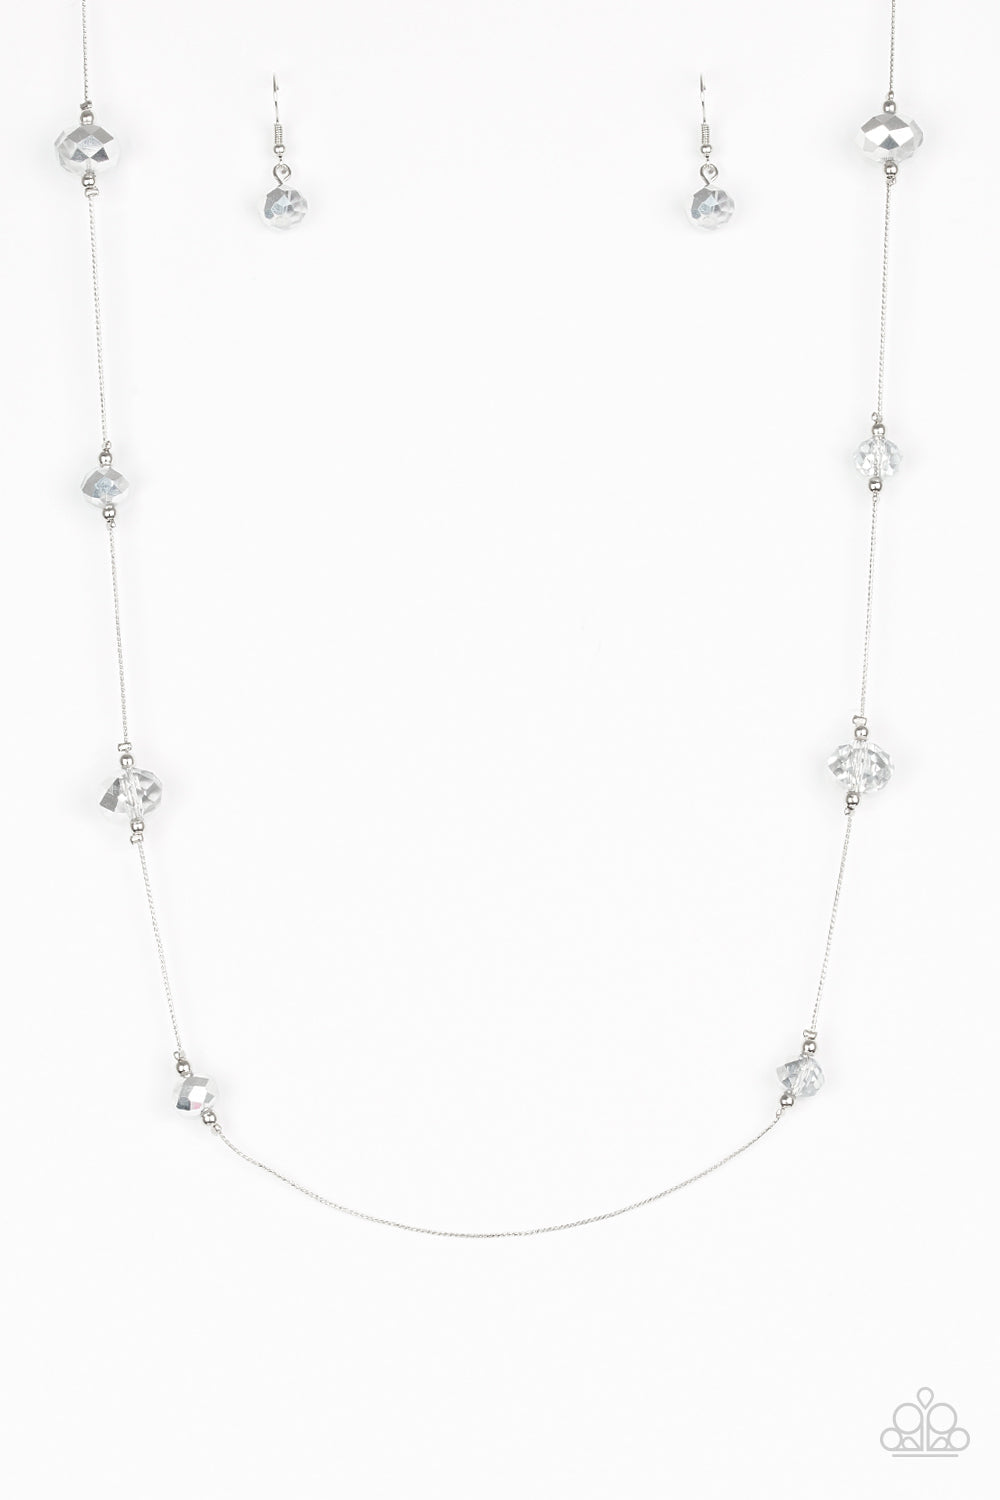 Champagne On The Rocks - Silver Necklace - Paparazzi Accessories - Infused with dainty silver accents, metallic and smoky crystal-like beads trickle along a dainty silver chain across the chest for a refined look. Features an adjustable clasp closure stylish necklace. 